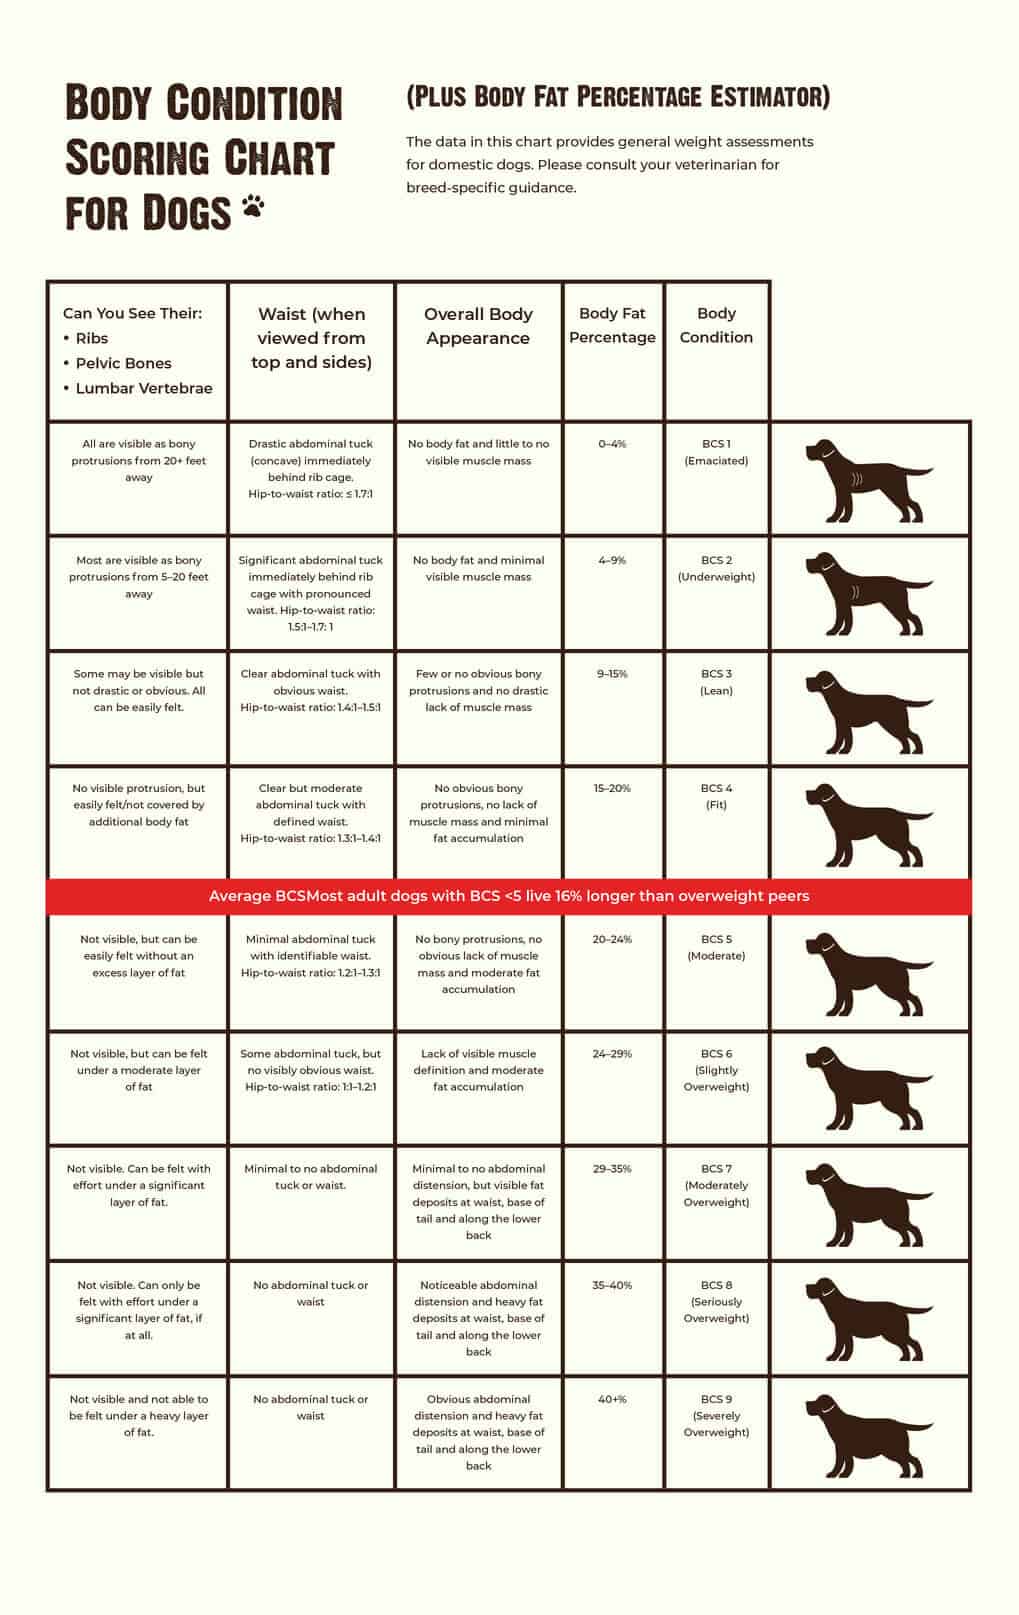 This is a chart for dogs' body condition scoring sheet. It estimates a dogs body fat percentage.